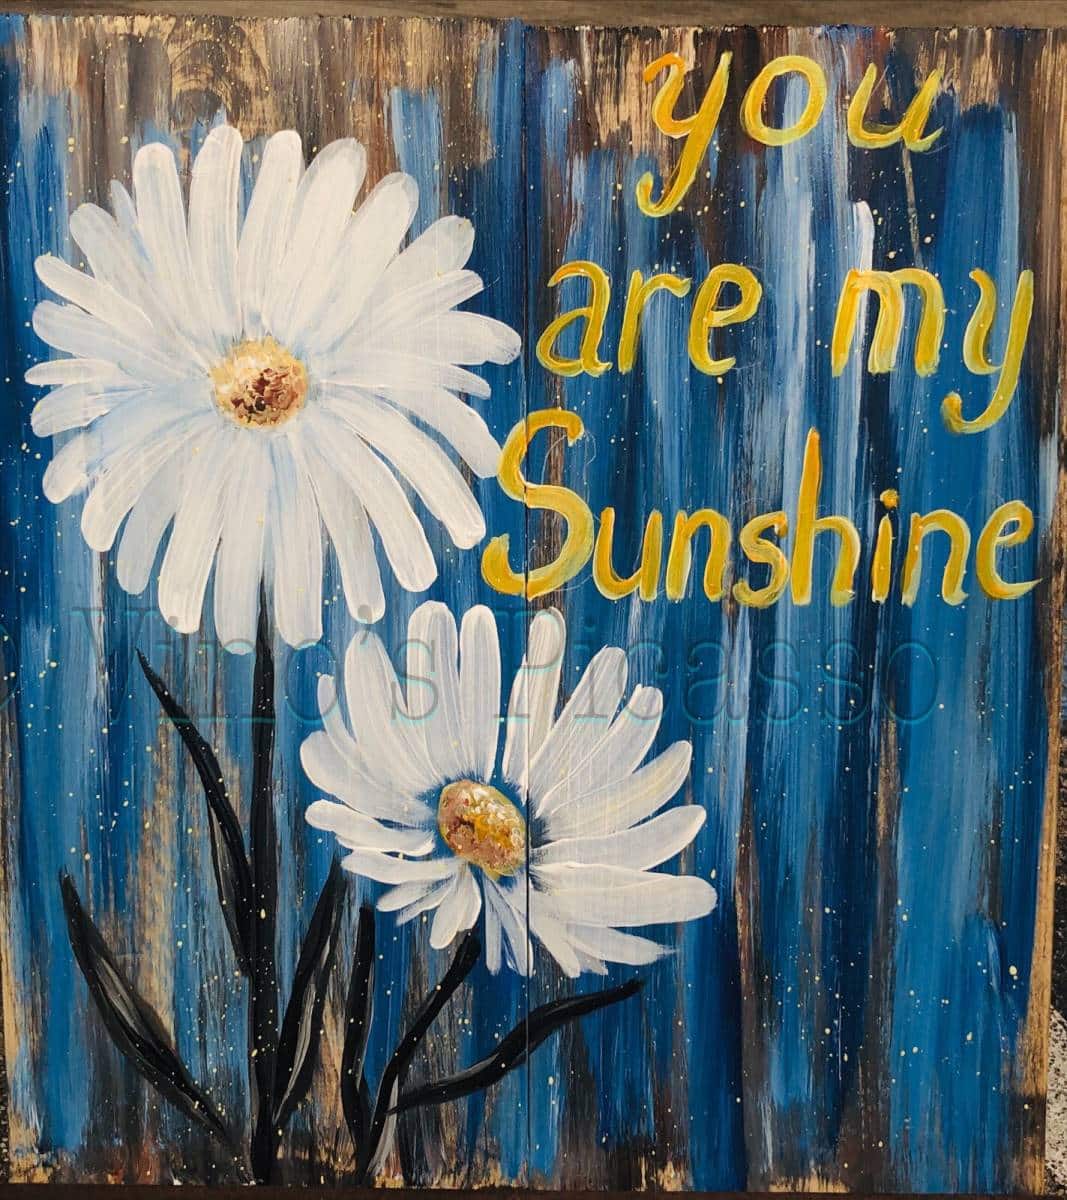 You are my sunshine